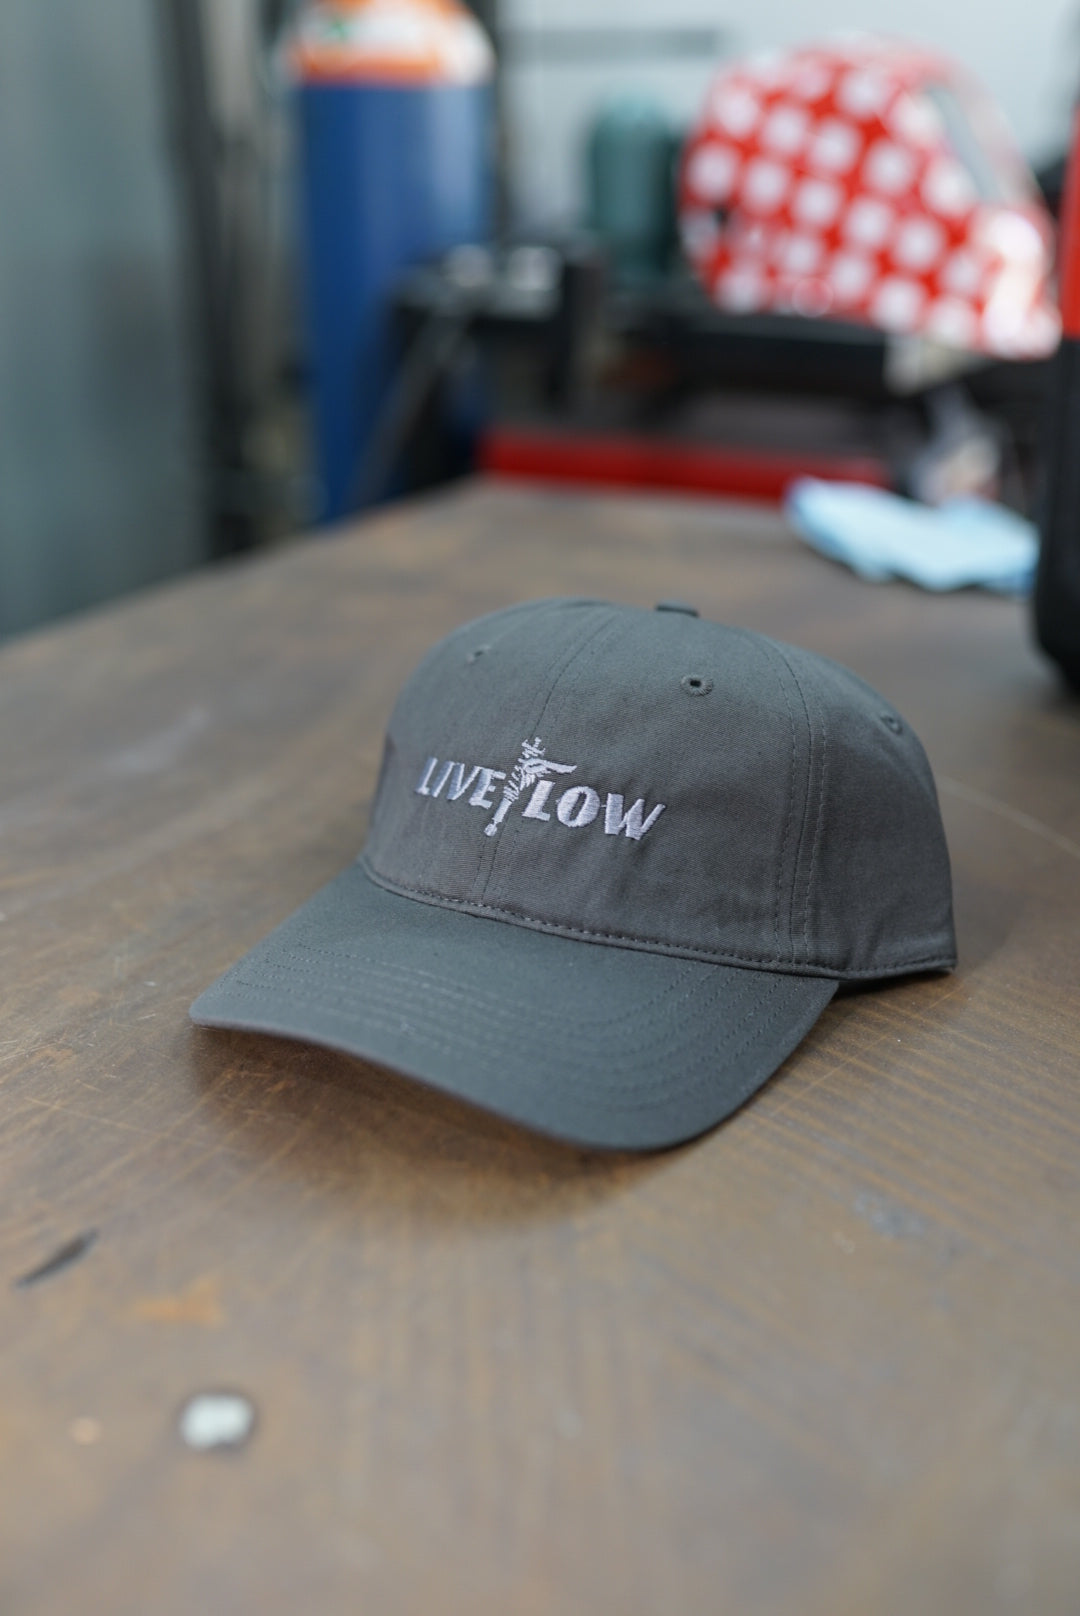 Live Low Winged Hat - Charcoal